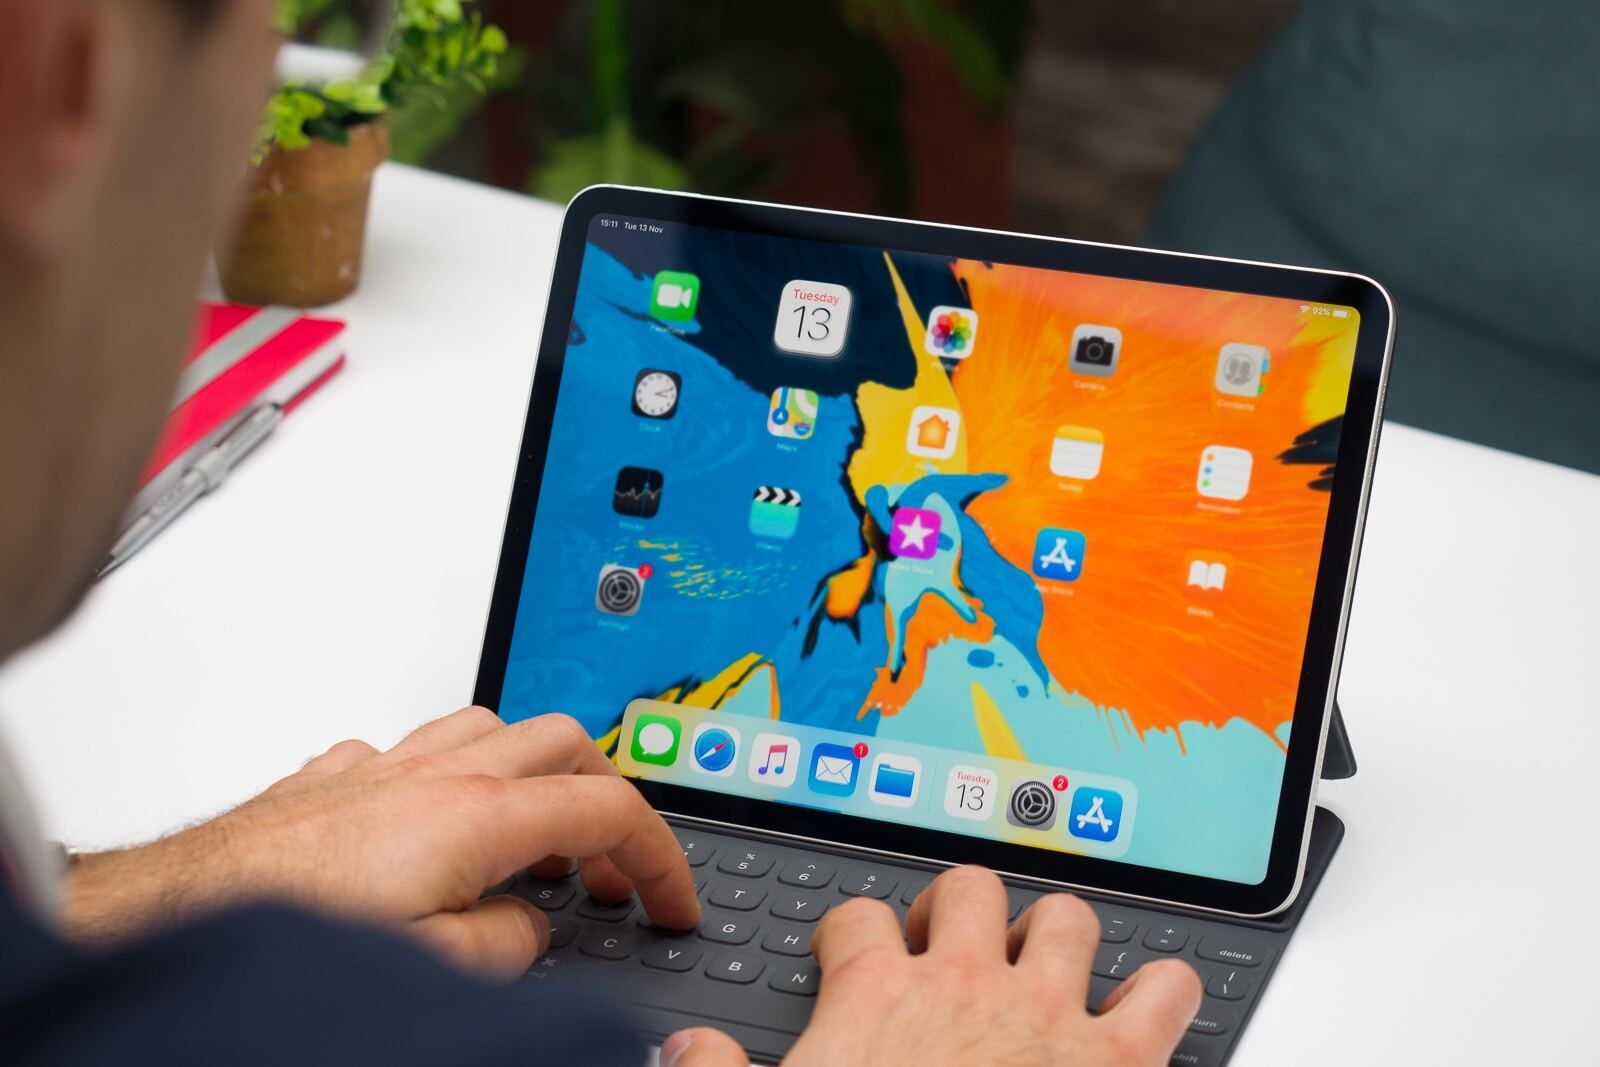 2018 iPad Pro - Apple’s 2020 iPad Pro will feature major camera upgrades and a surprise feature